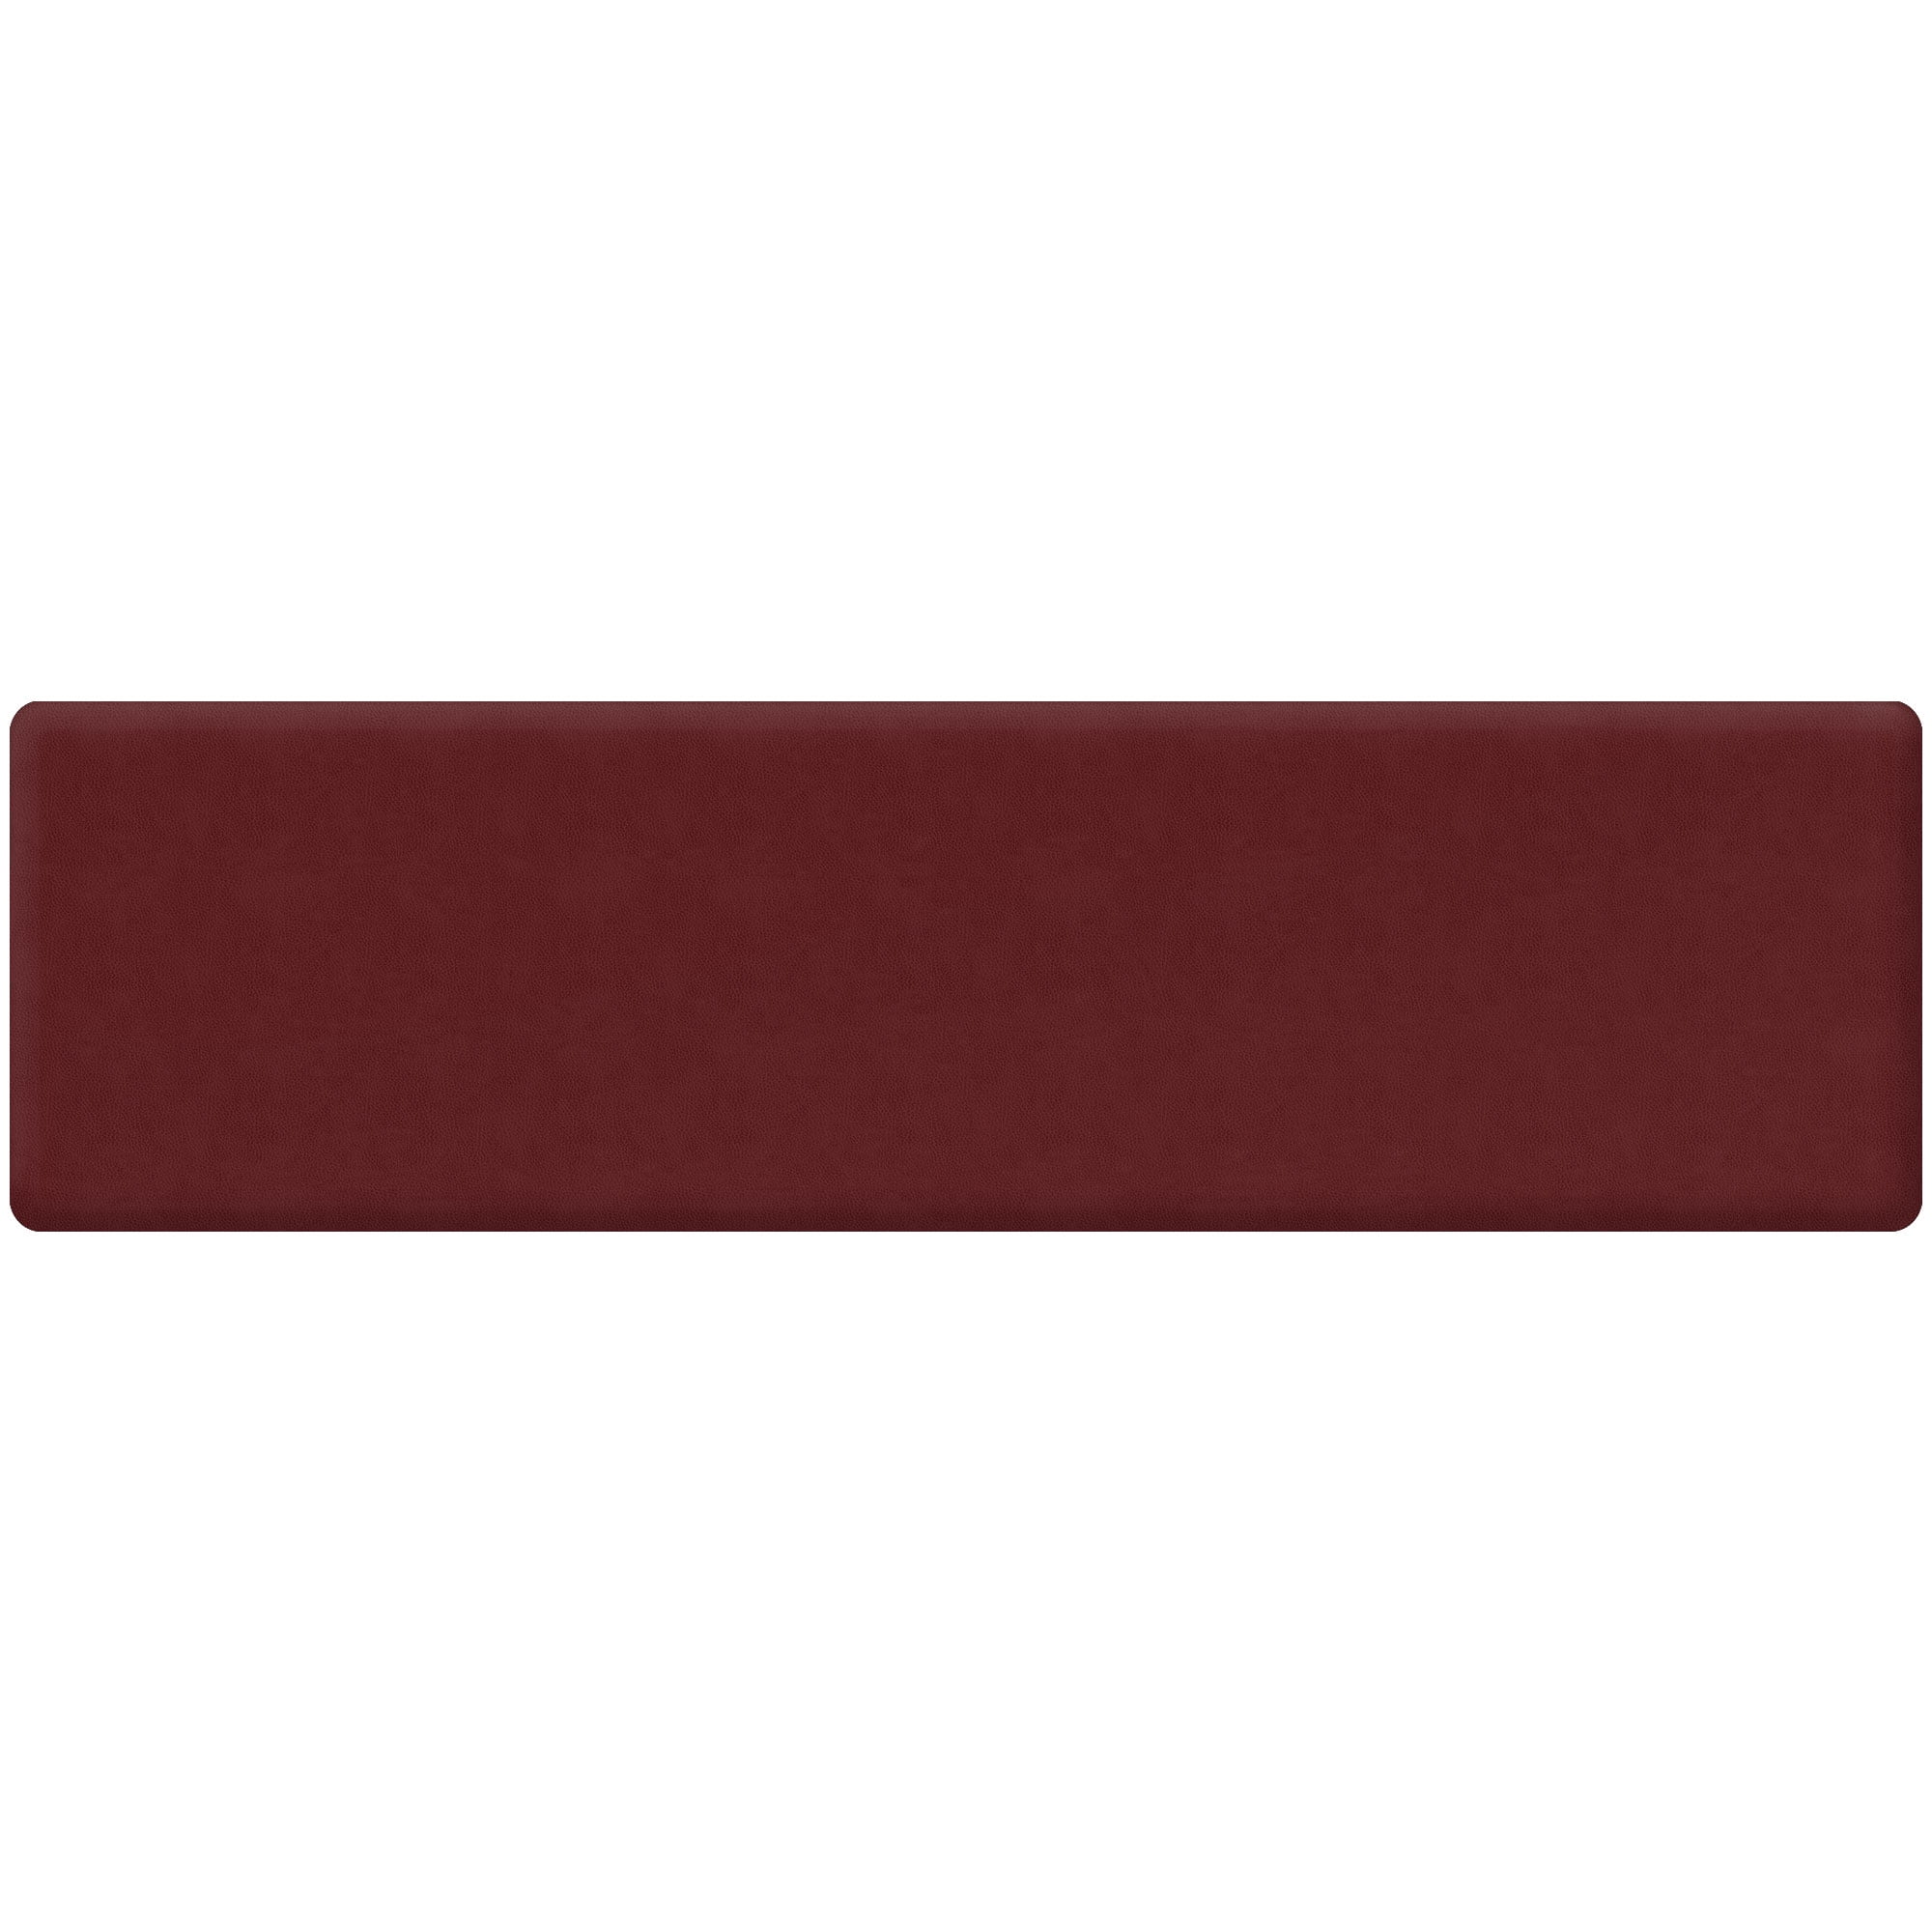 Oasis Kitchen Mats Leather Grain Comfort Anti Fatigue Mat & Kitchen Rug 5 Colors and 3 Sizes Perfect for Kitchens and Standing Desks 20x39x3/4-Inch, Red